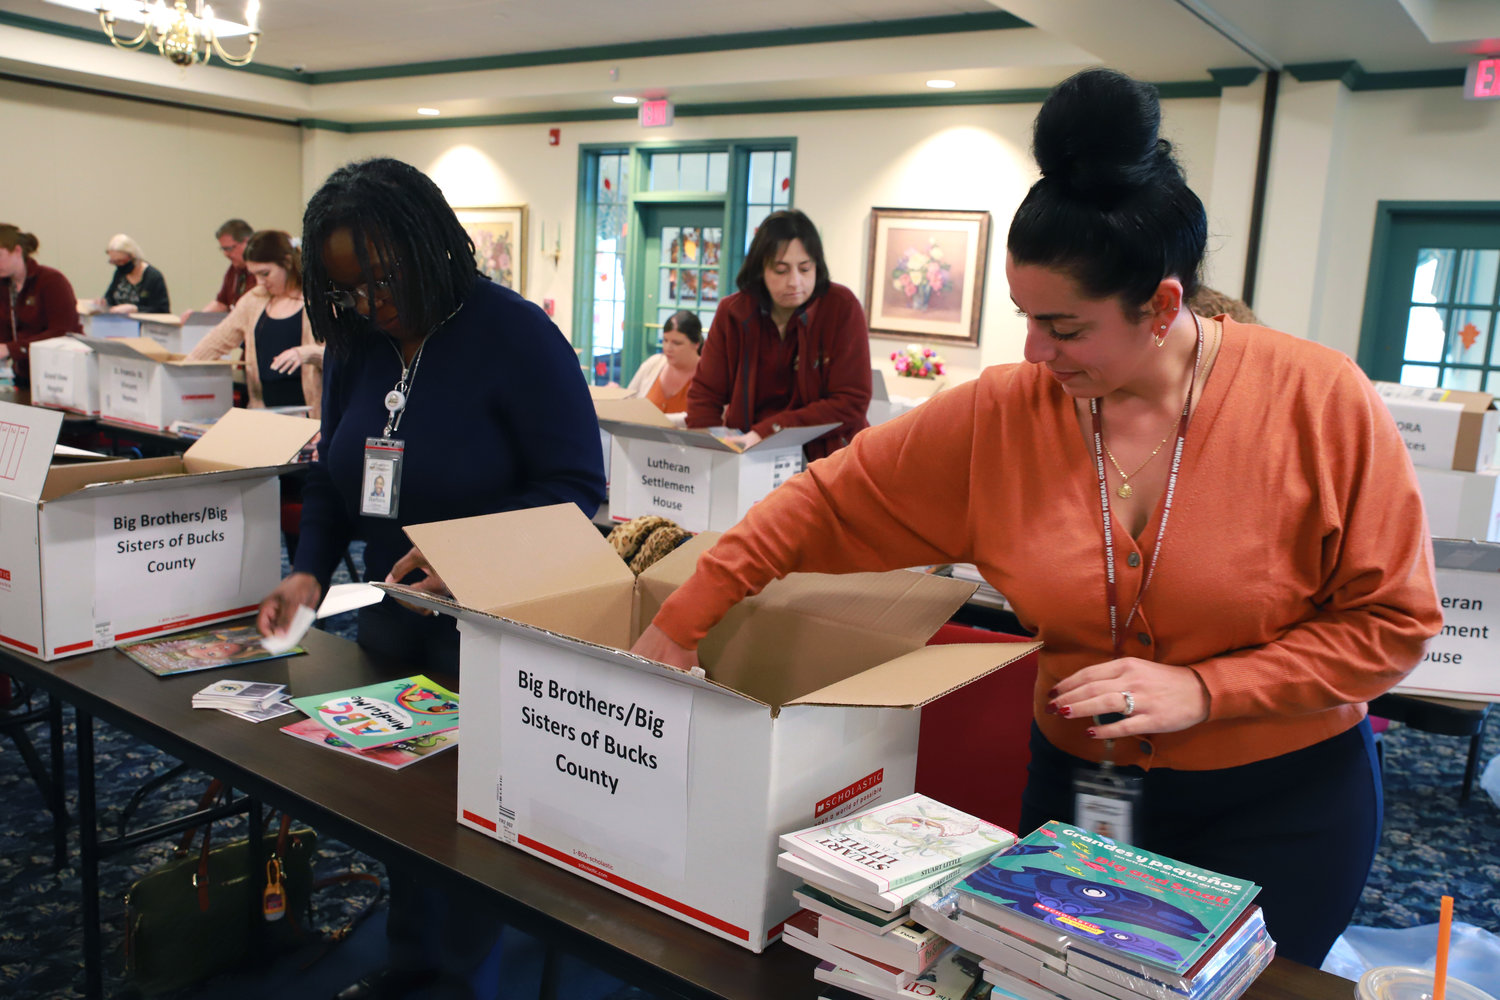 American Heritage’s Books for Kids Program promotes children’s literacy and makes book donations each year to local-area hospitals and other organizations.